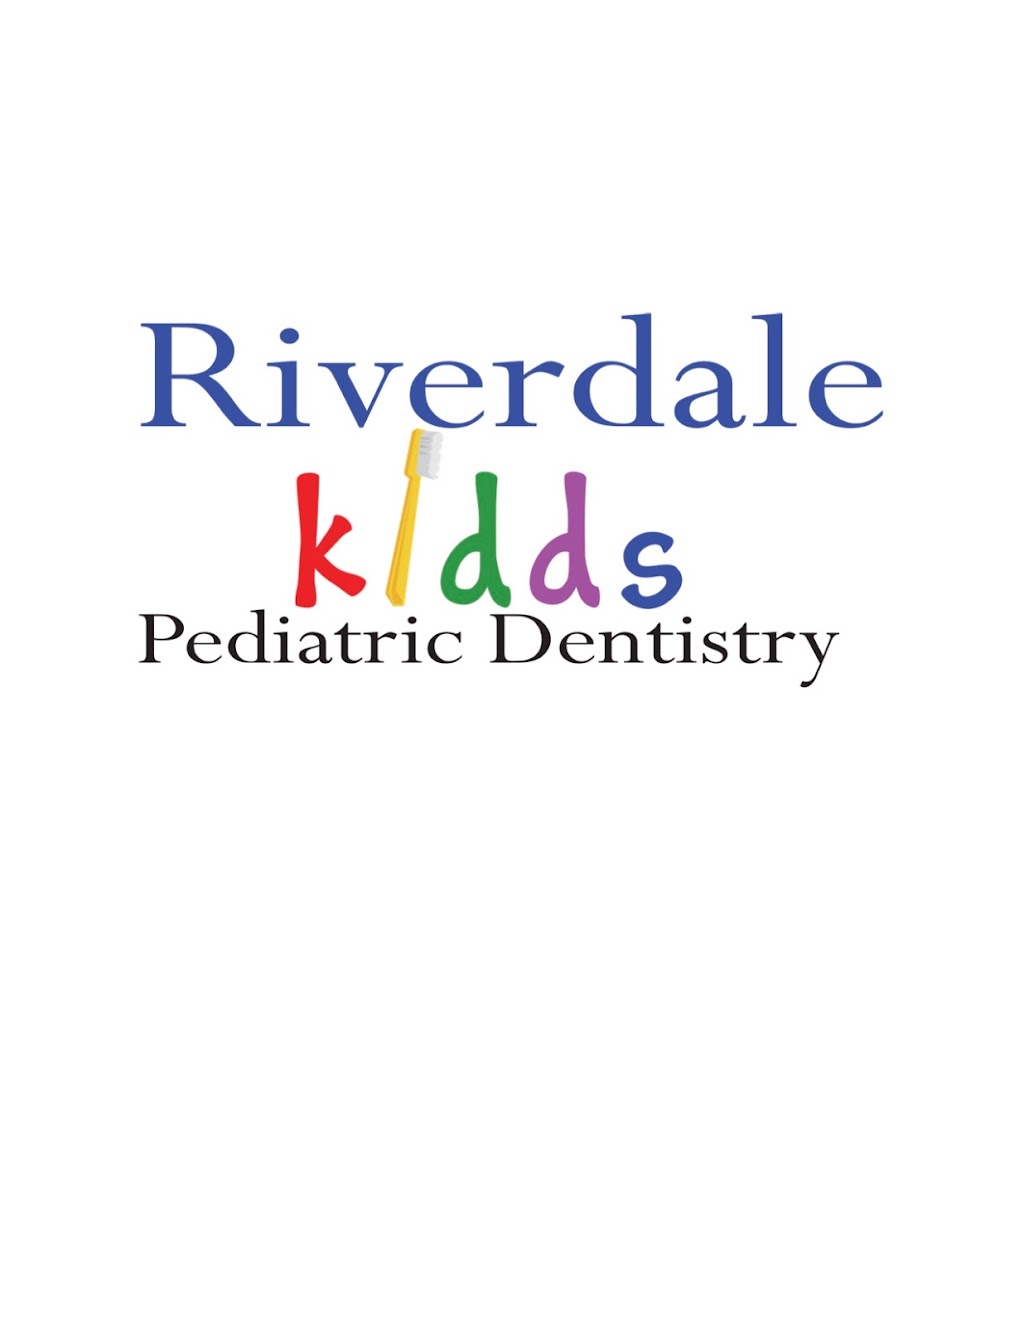 Riverdale Kidds Pediatric Dentistry | 3585 124th Ave NW #400, Minneapolis, MN 55433, USA | Phone: (763) 767-1524